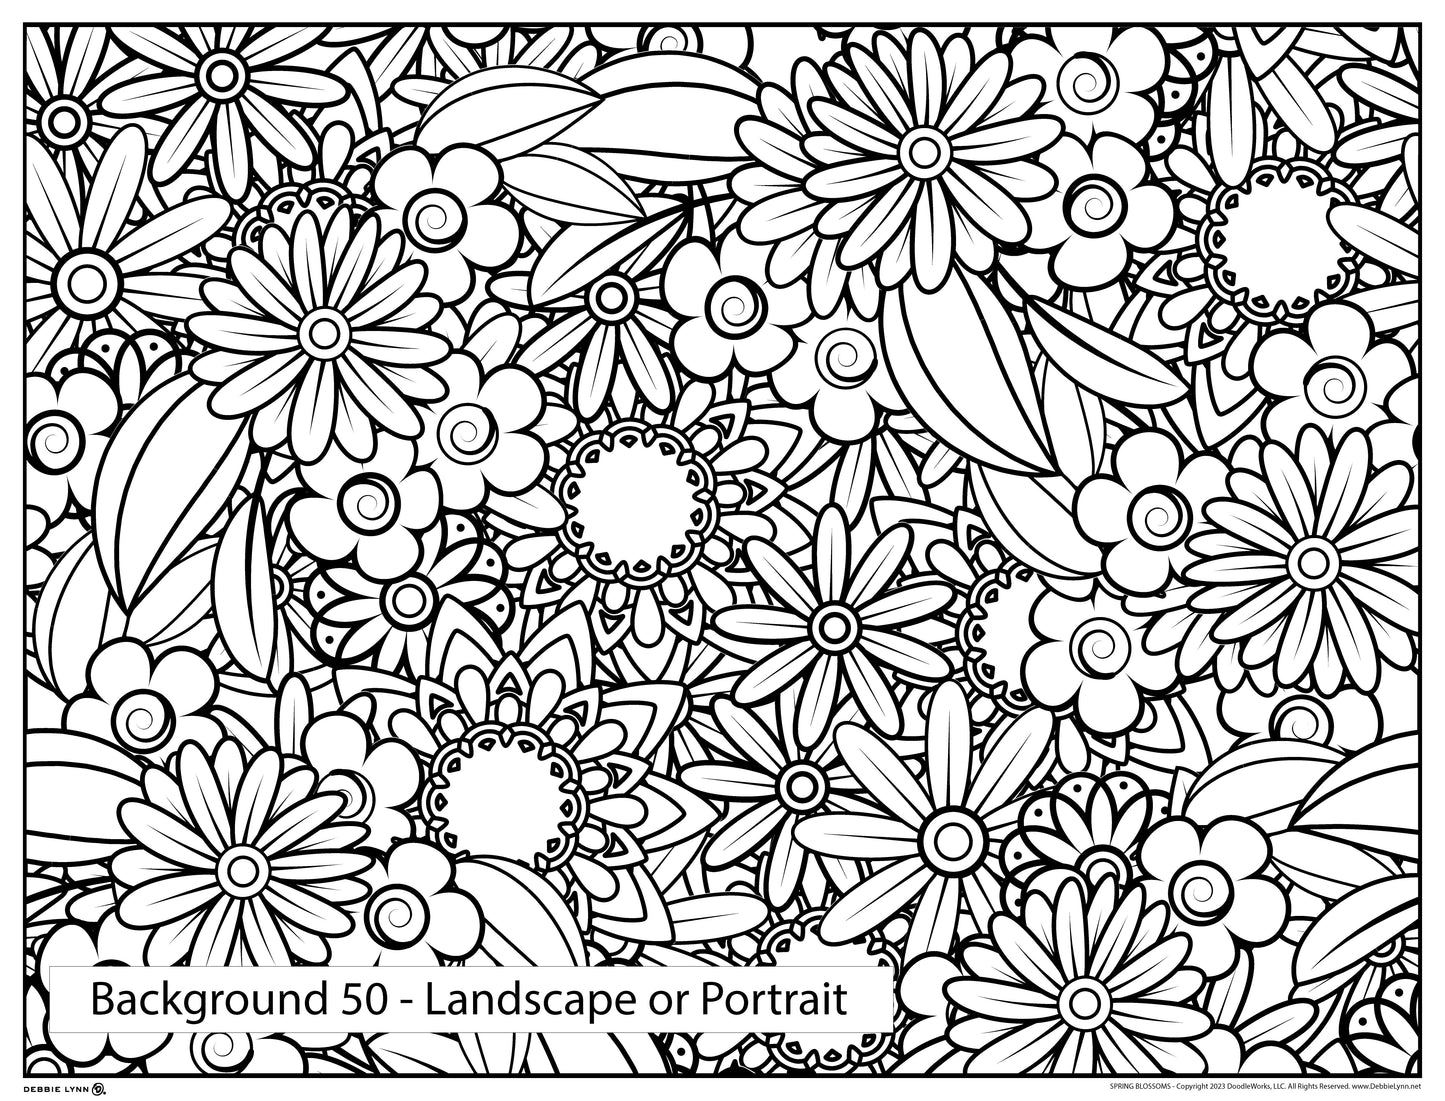 Background 50 Custom Personalized Giant Coloring Poster 46"x60"